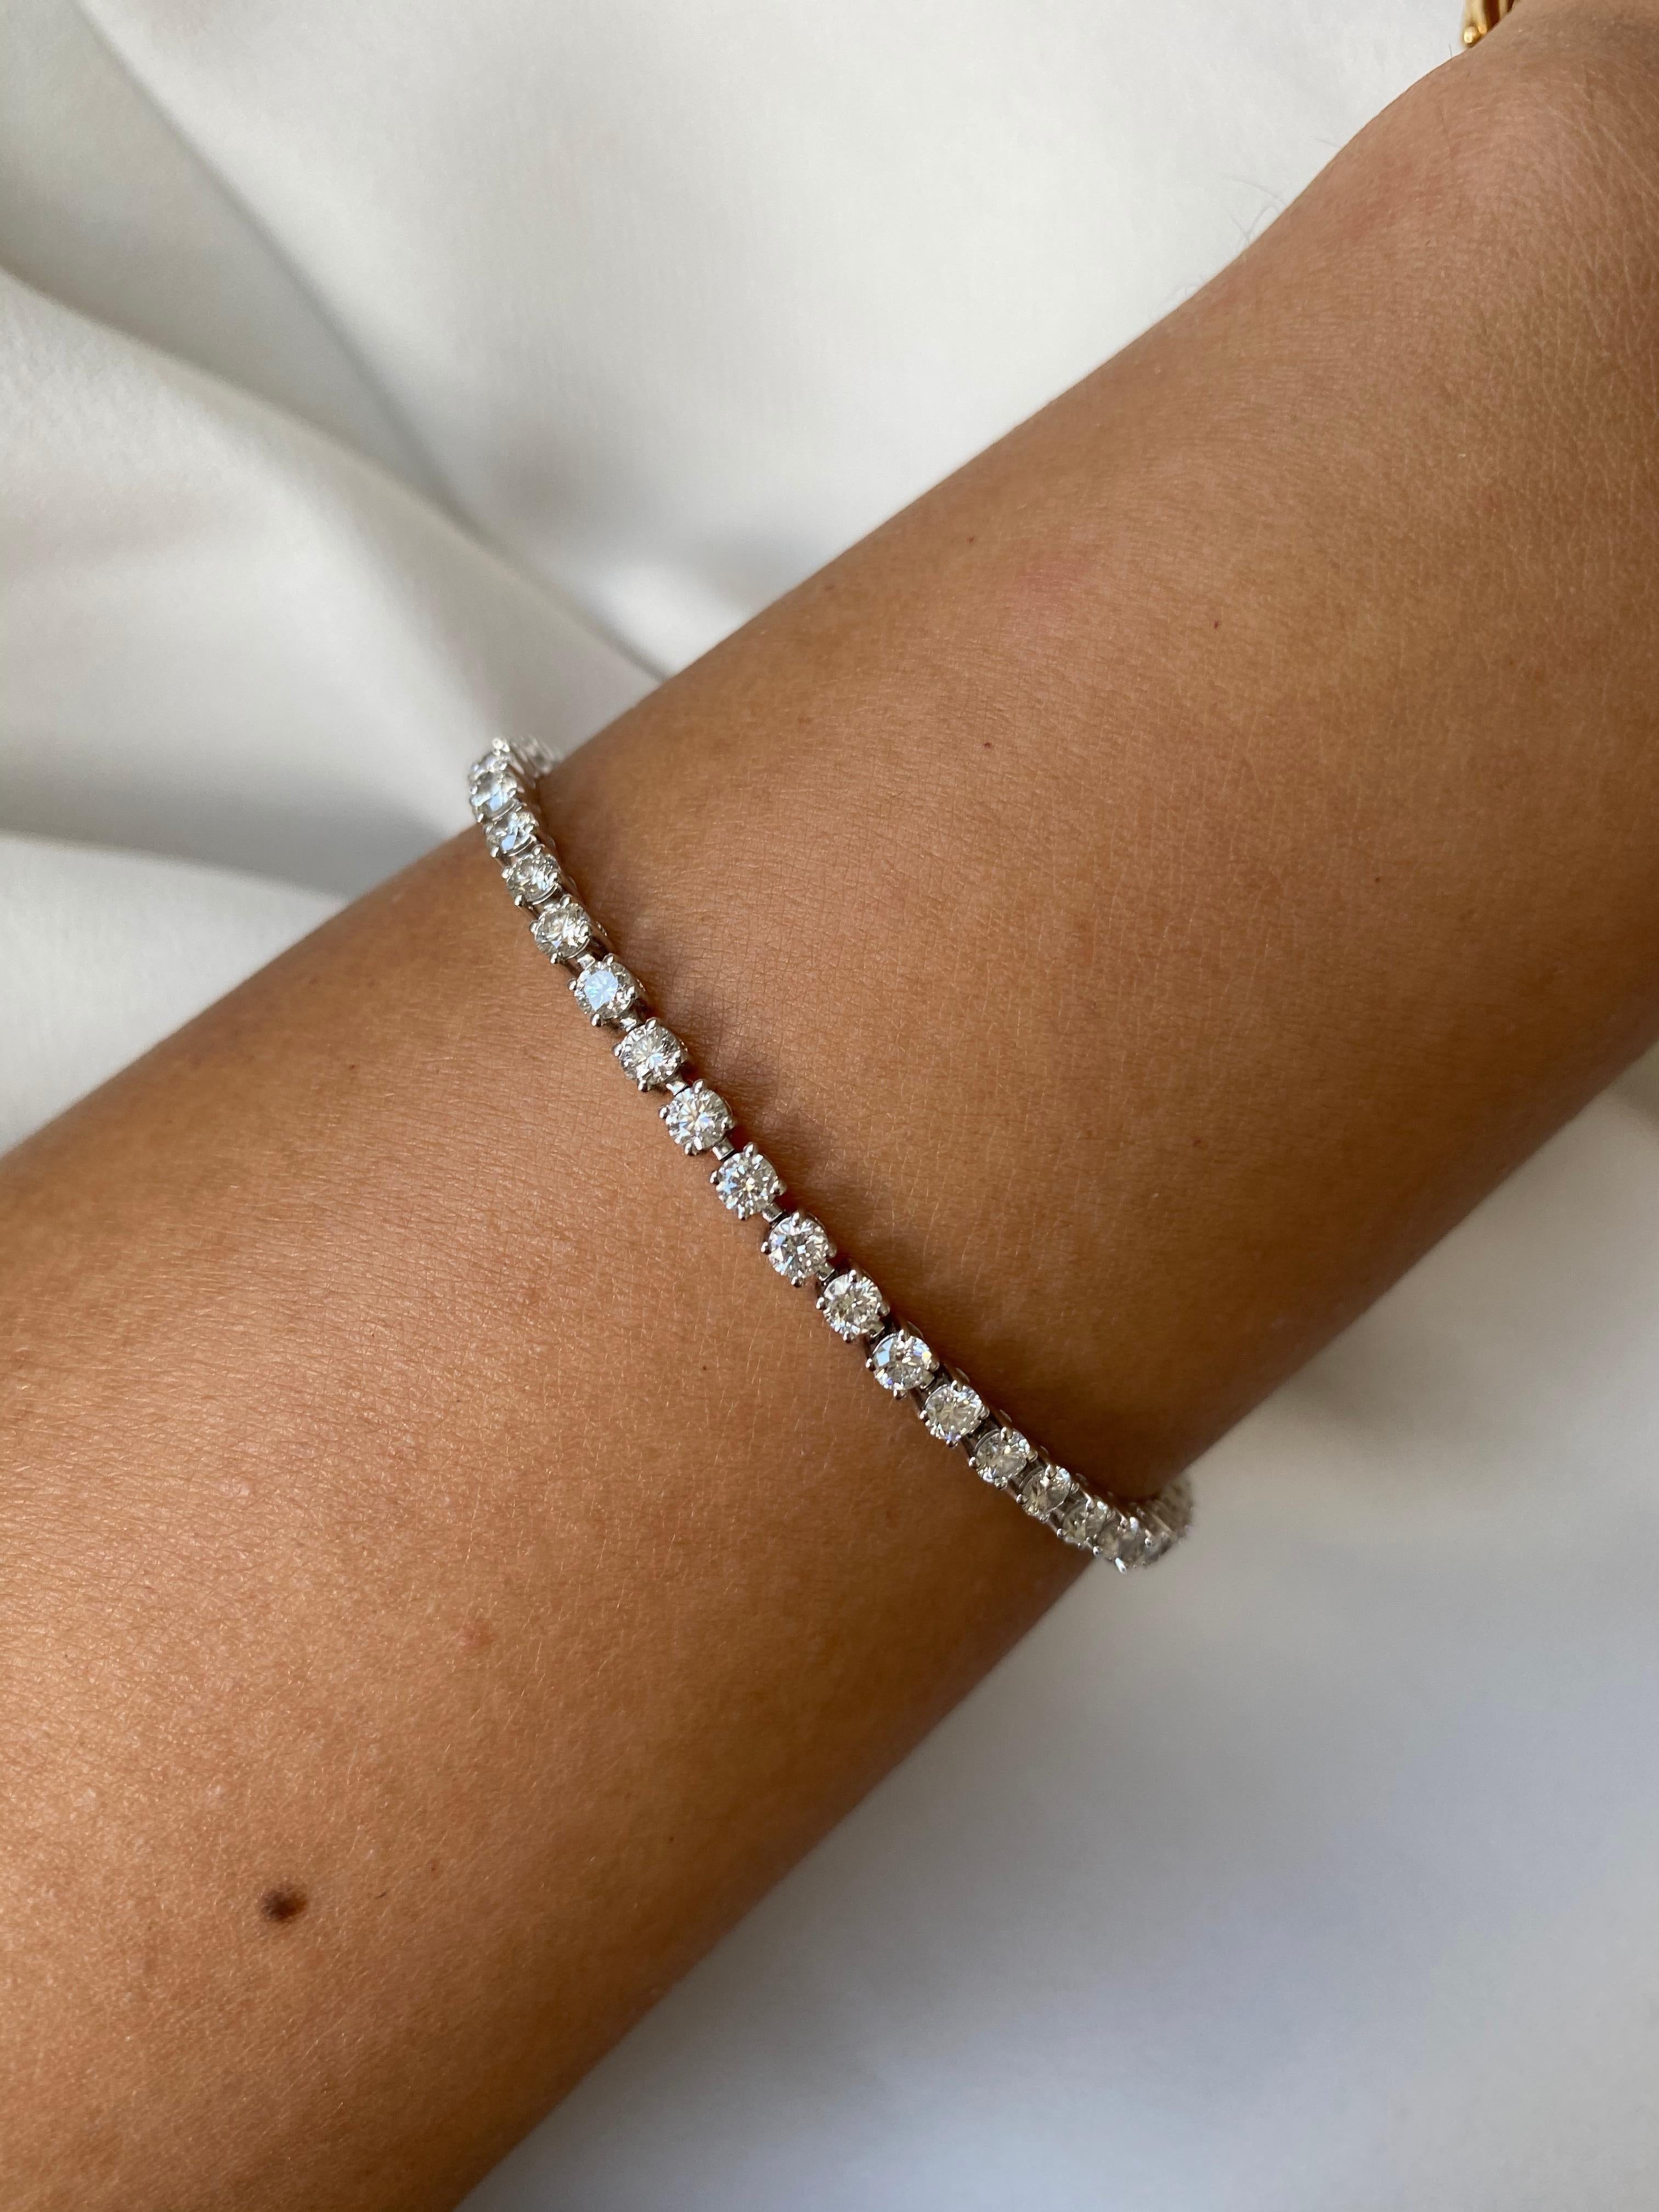 Made by nature over a period of time and under great pressure, diamonds are a beautiful reminder that all things great take time. Diamonds are a girl’s best friend because there is never a wrong occasion to accessorize with diamond jewelry. This